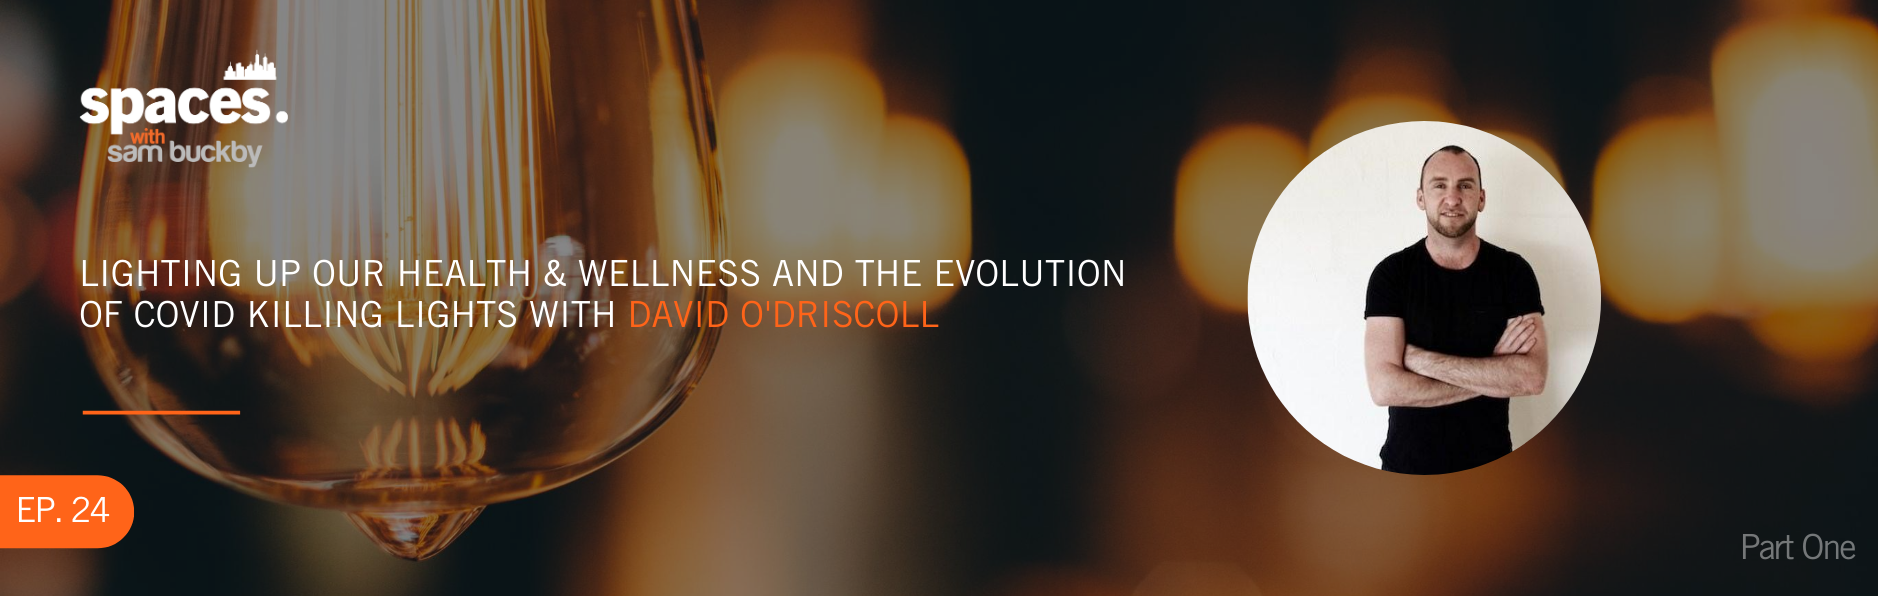 Episode 24. Lighting up our health and wellness and the evolution of COVID killing lights with David O’Driscoll (Part 1)